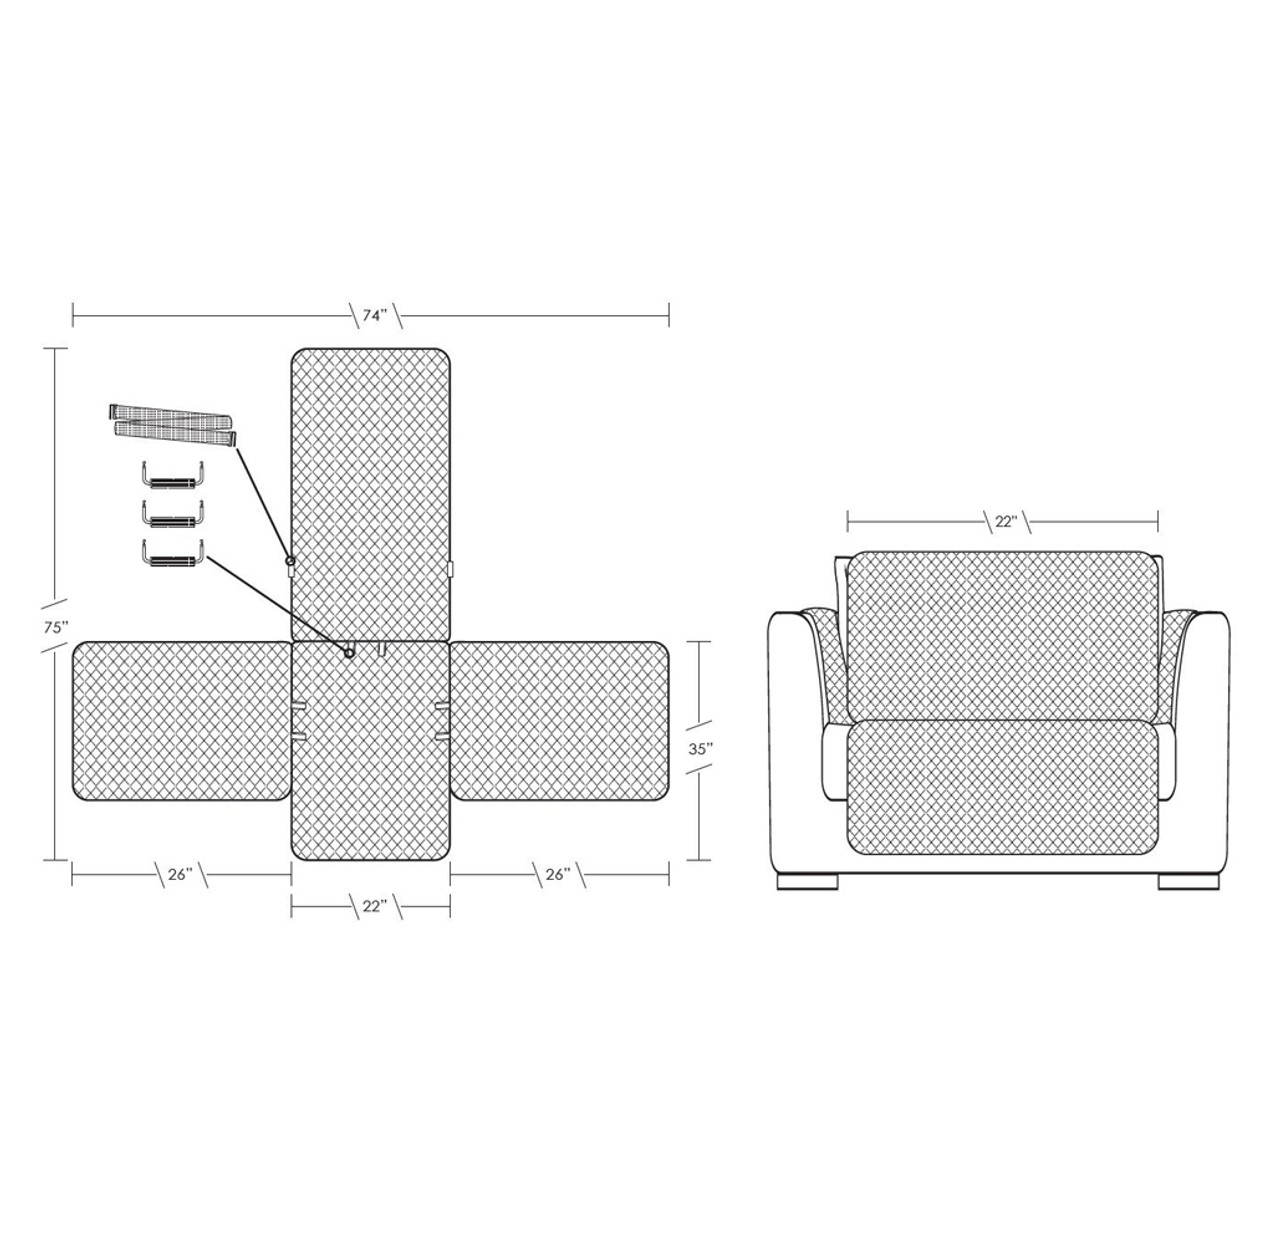 FurHaven™ Reversible Furniture Protector product image